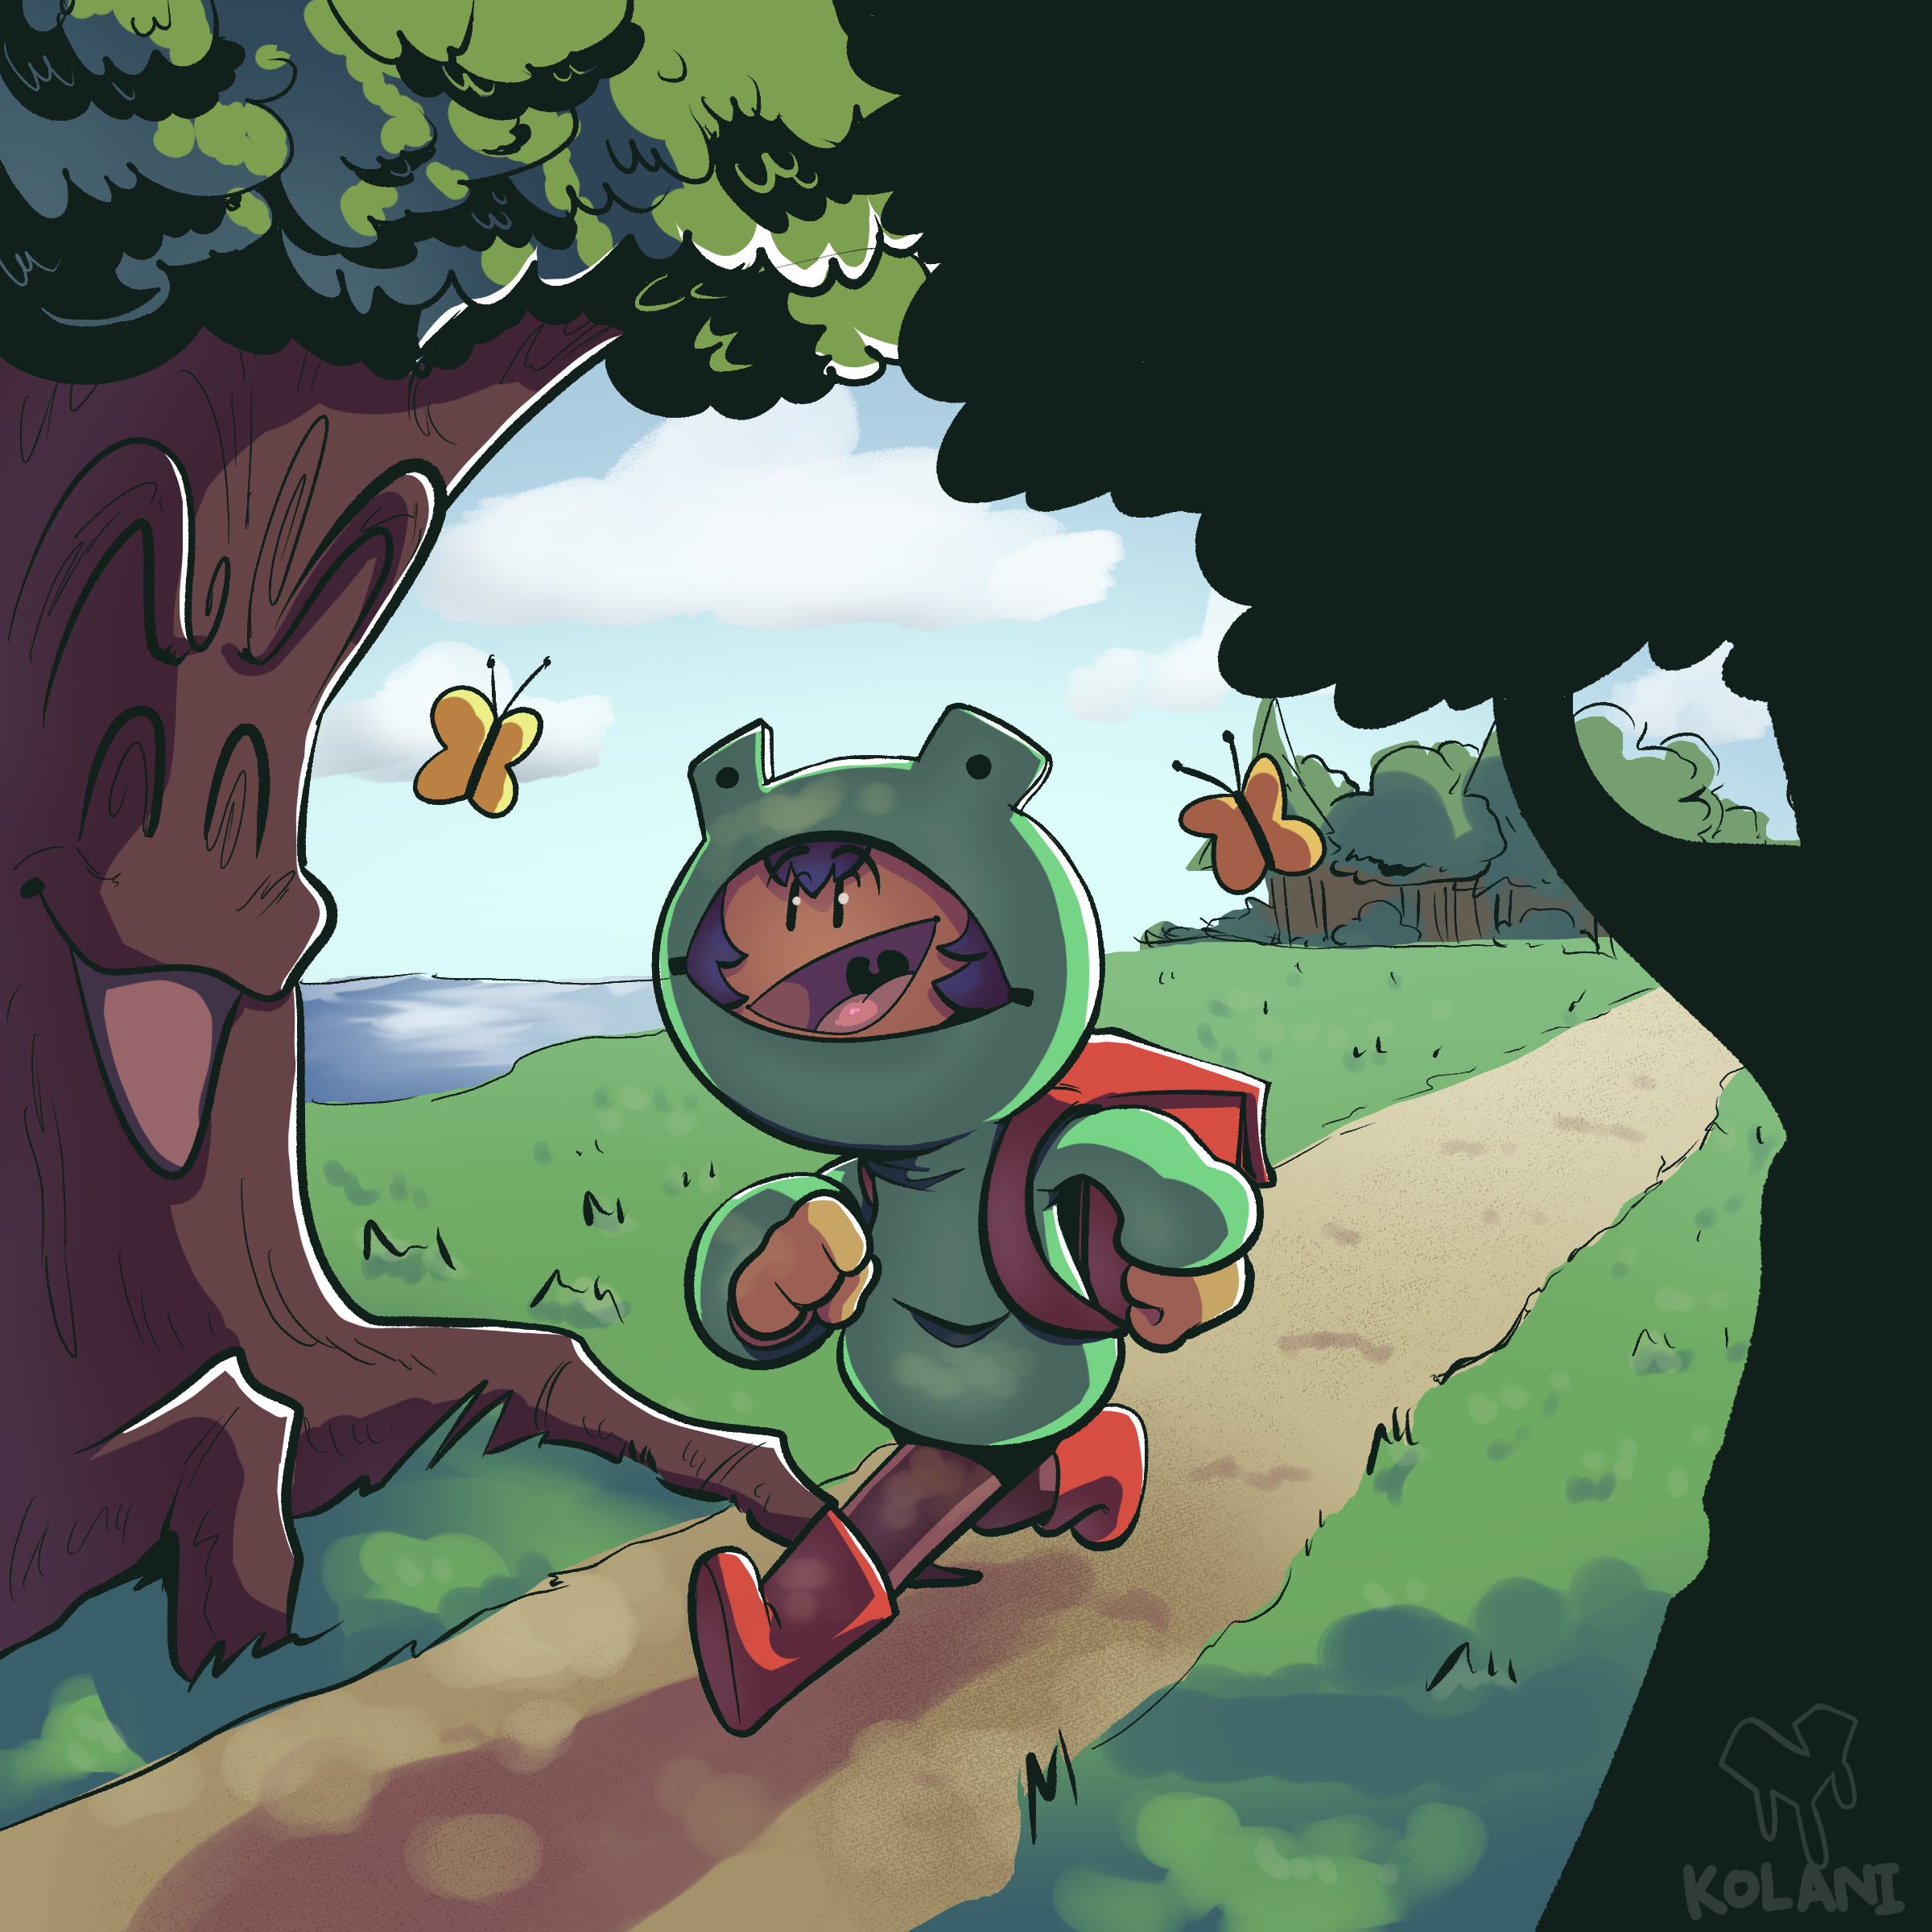 Just a little guy running into a magical forest where nothing can go wrong!